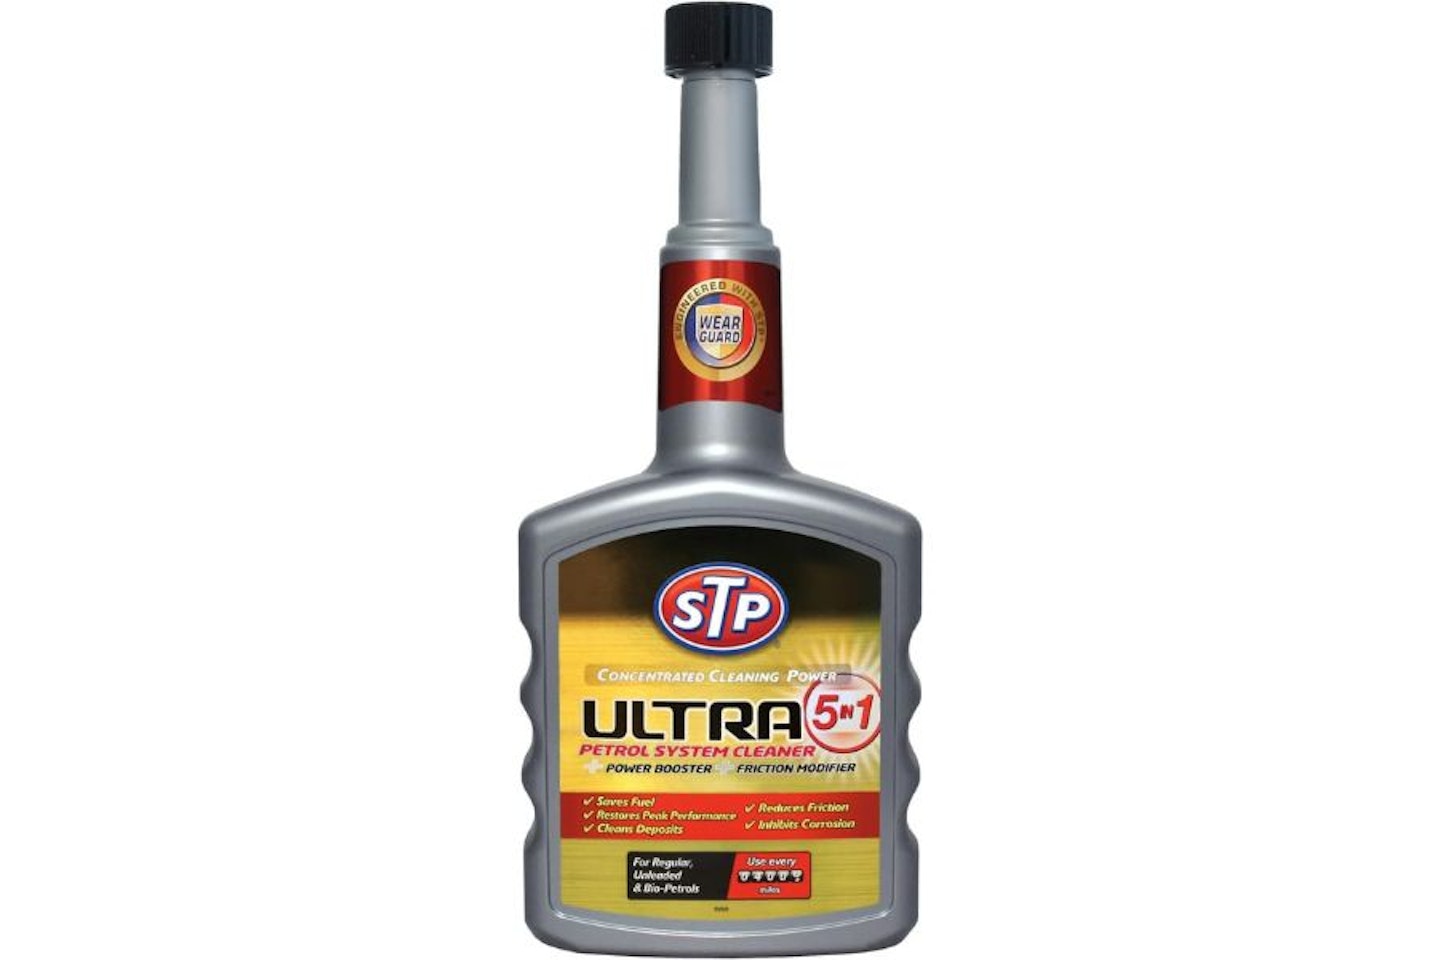 STP 5-in-1 Engine Cleaner